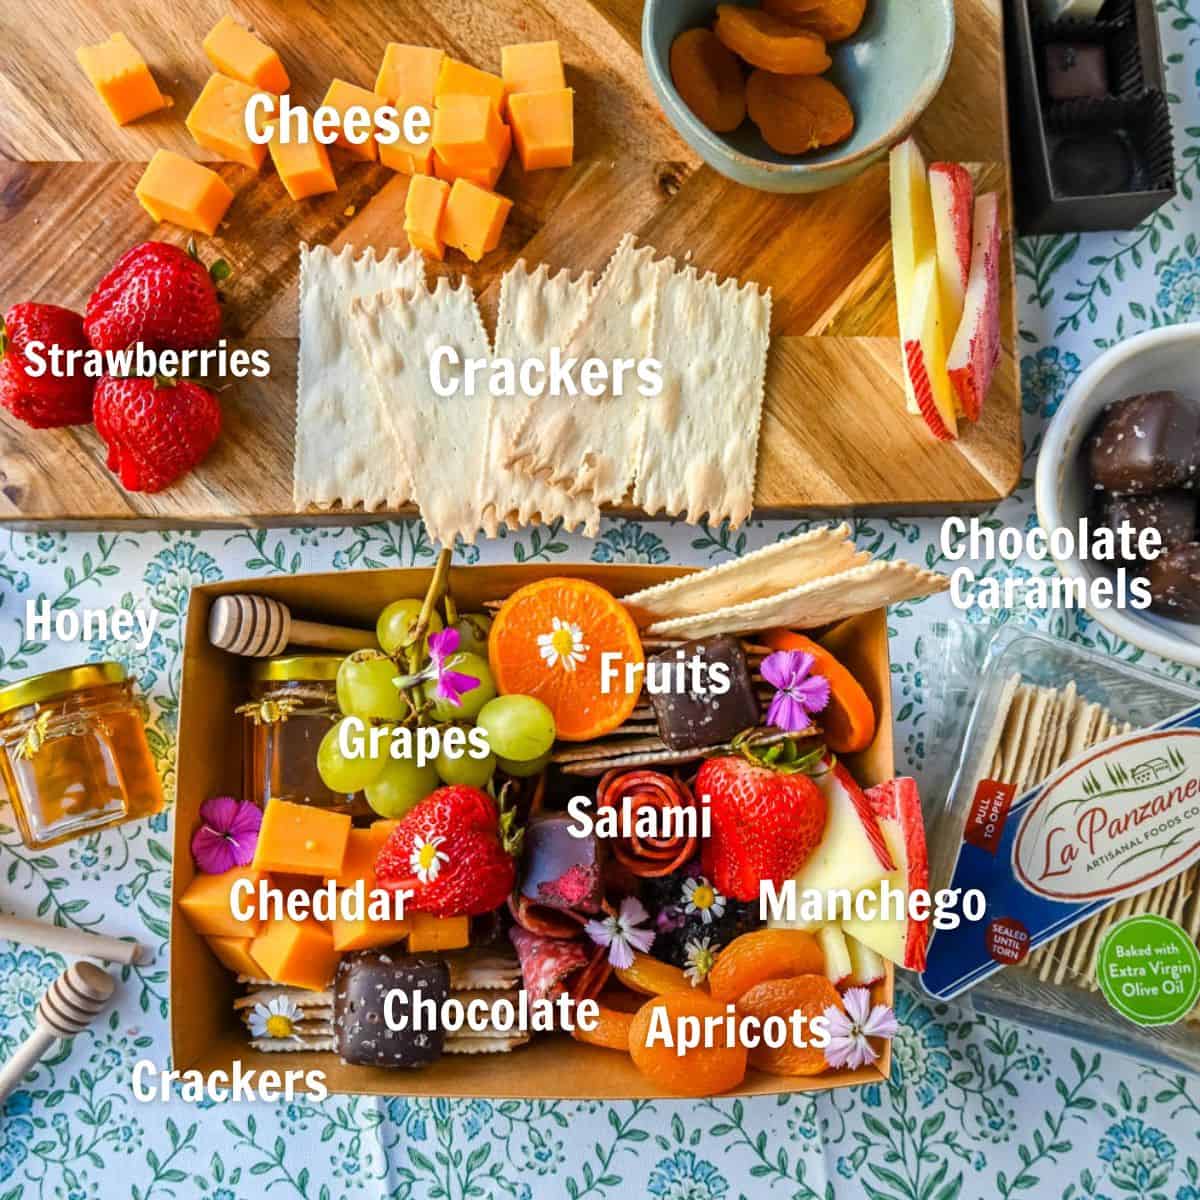 Charcuterie boards have become the epitome of gourmet snacking. But what if you are craving a charcuterie board but you want it on a smaller scale? Enter the mini charcuterie box – a perfect personal-sized grazing box that packs all the flavor in a small package. 